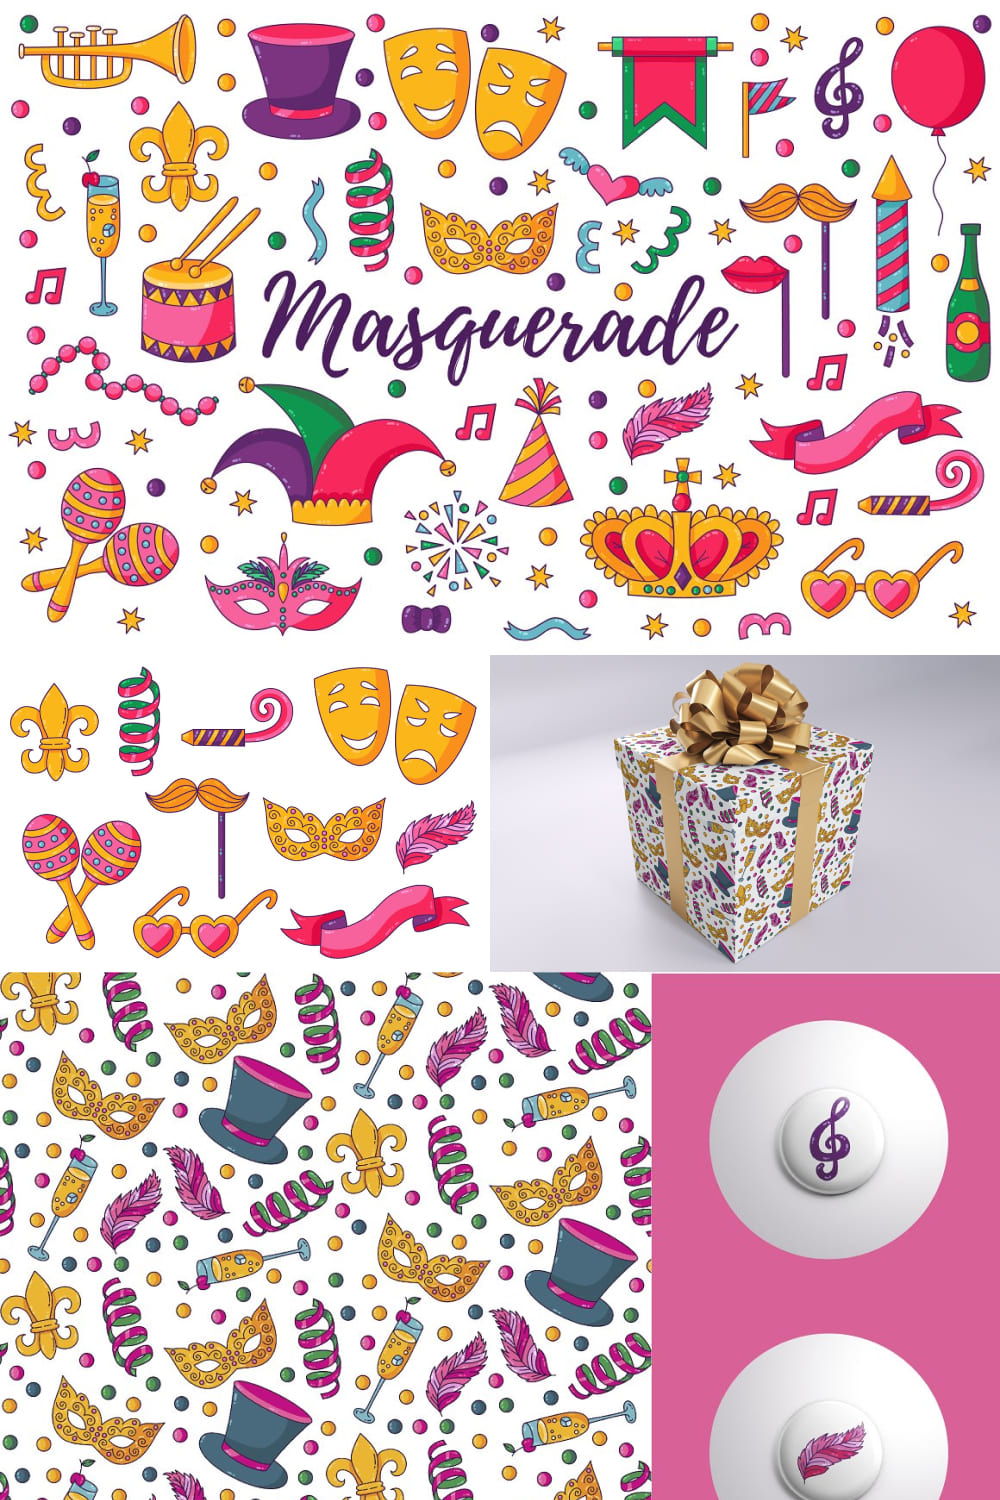 03 masquerade icons vector pack 1000x1500 523